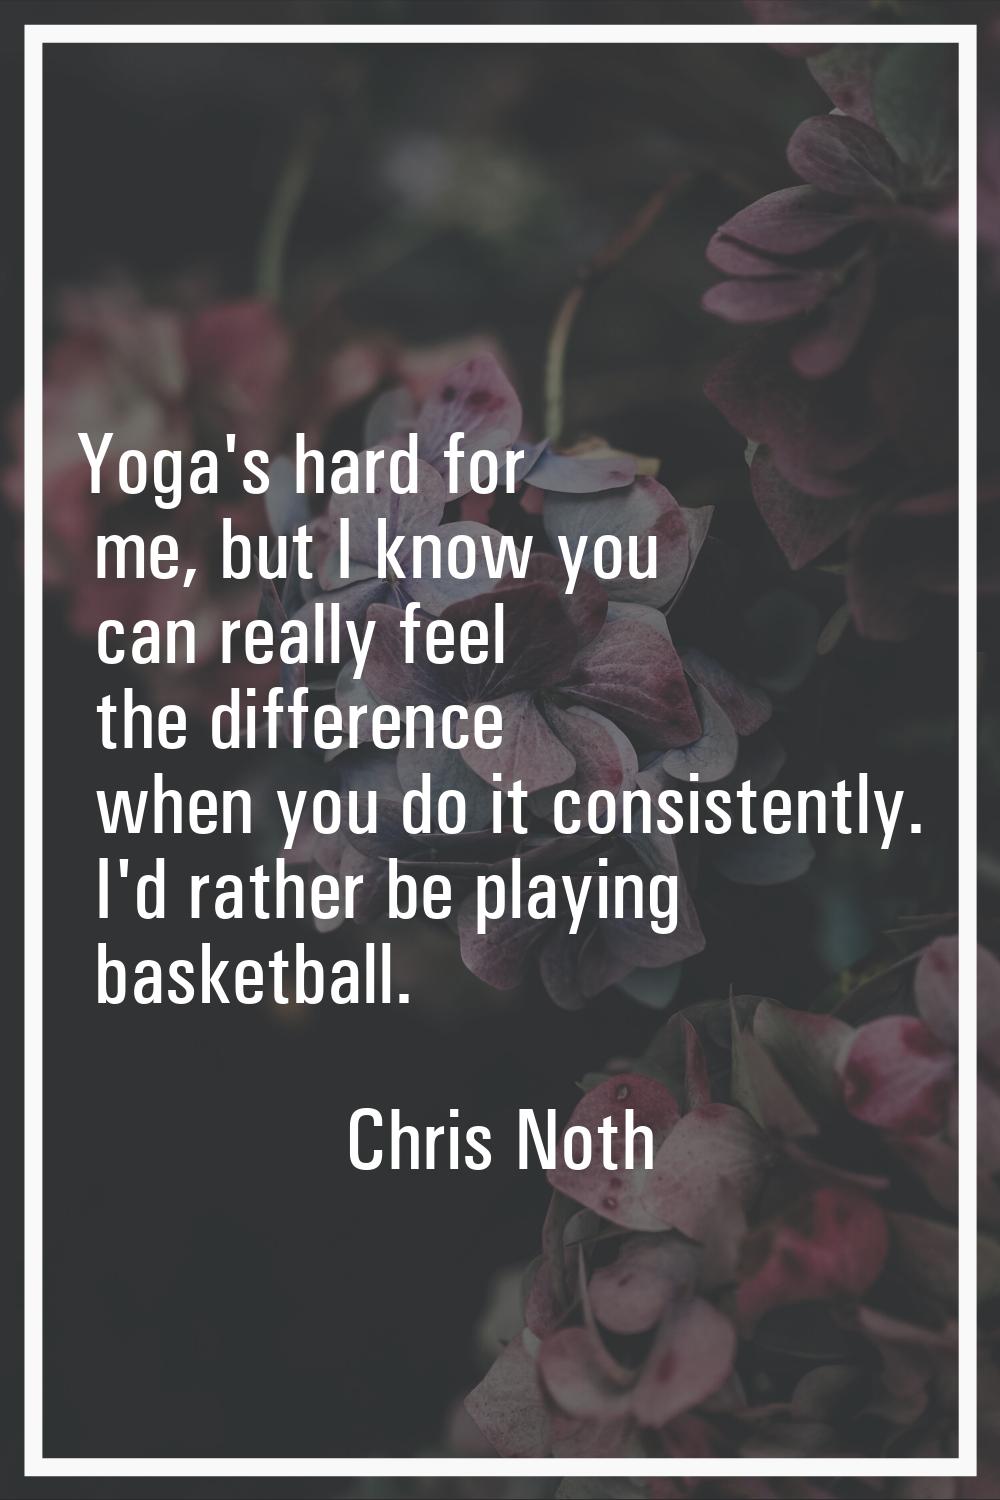 Yoga's hard for me, but I know you can really feel the difference when you do it consistently. I'd 